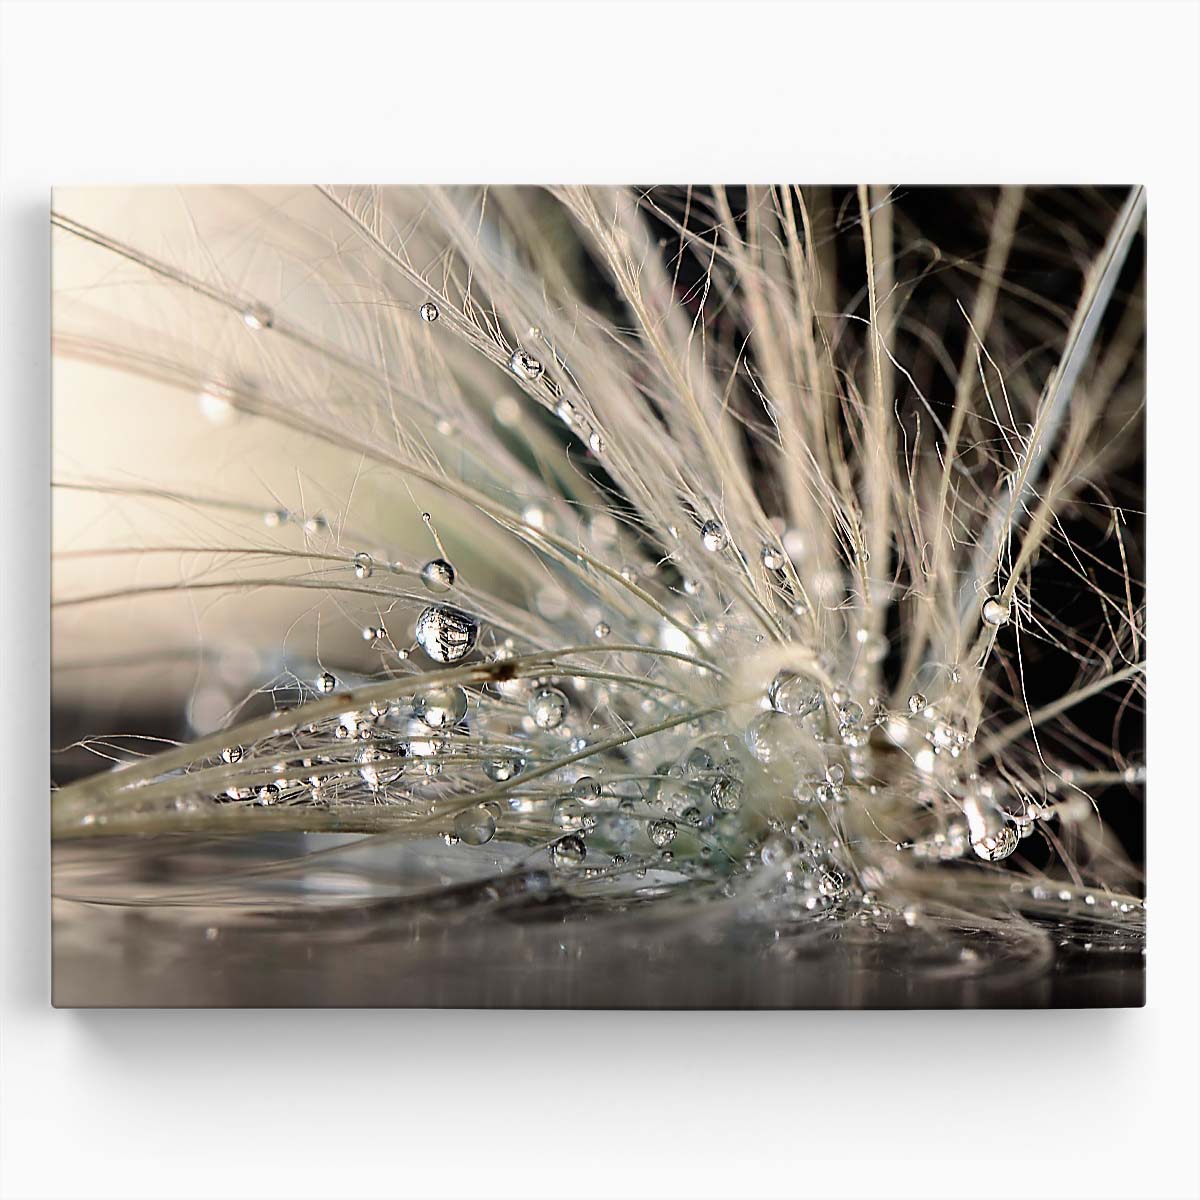 Pearl Water Drops Macro Photography by Maryam Zahirimehr Wall Art by Luxuriance Designs. Made in USA.